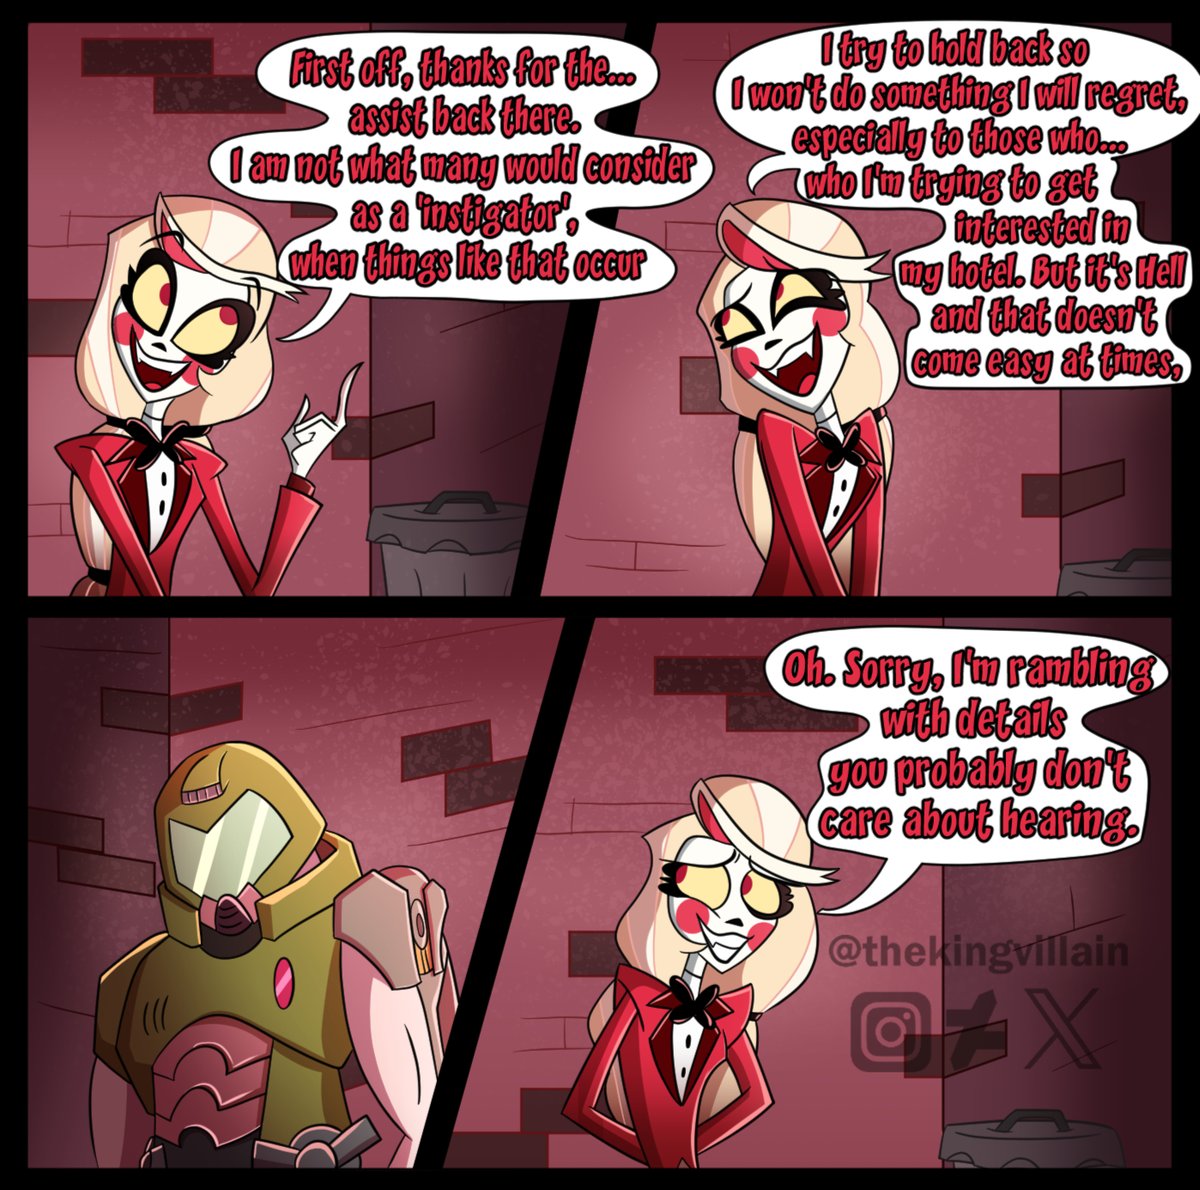 Charlie meets Doom Slayer 2

commissioned by
@Wallace1084

Based on the fanfic of
@J_Varga_

#DoomEternal #doomslayer #HazbinHotel #HazbinHotelFanart #HazbinHotelCharlie #Commission #commissionopen #CharlieMorningstar #hazbinhotelcomic #comic #fancomic #fanfiction